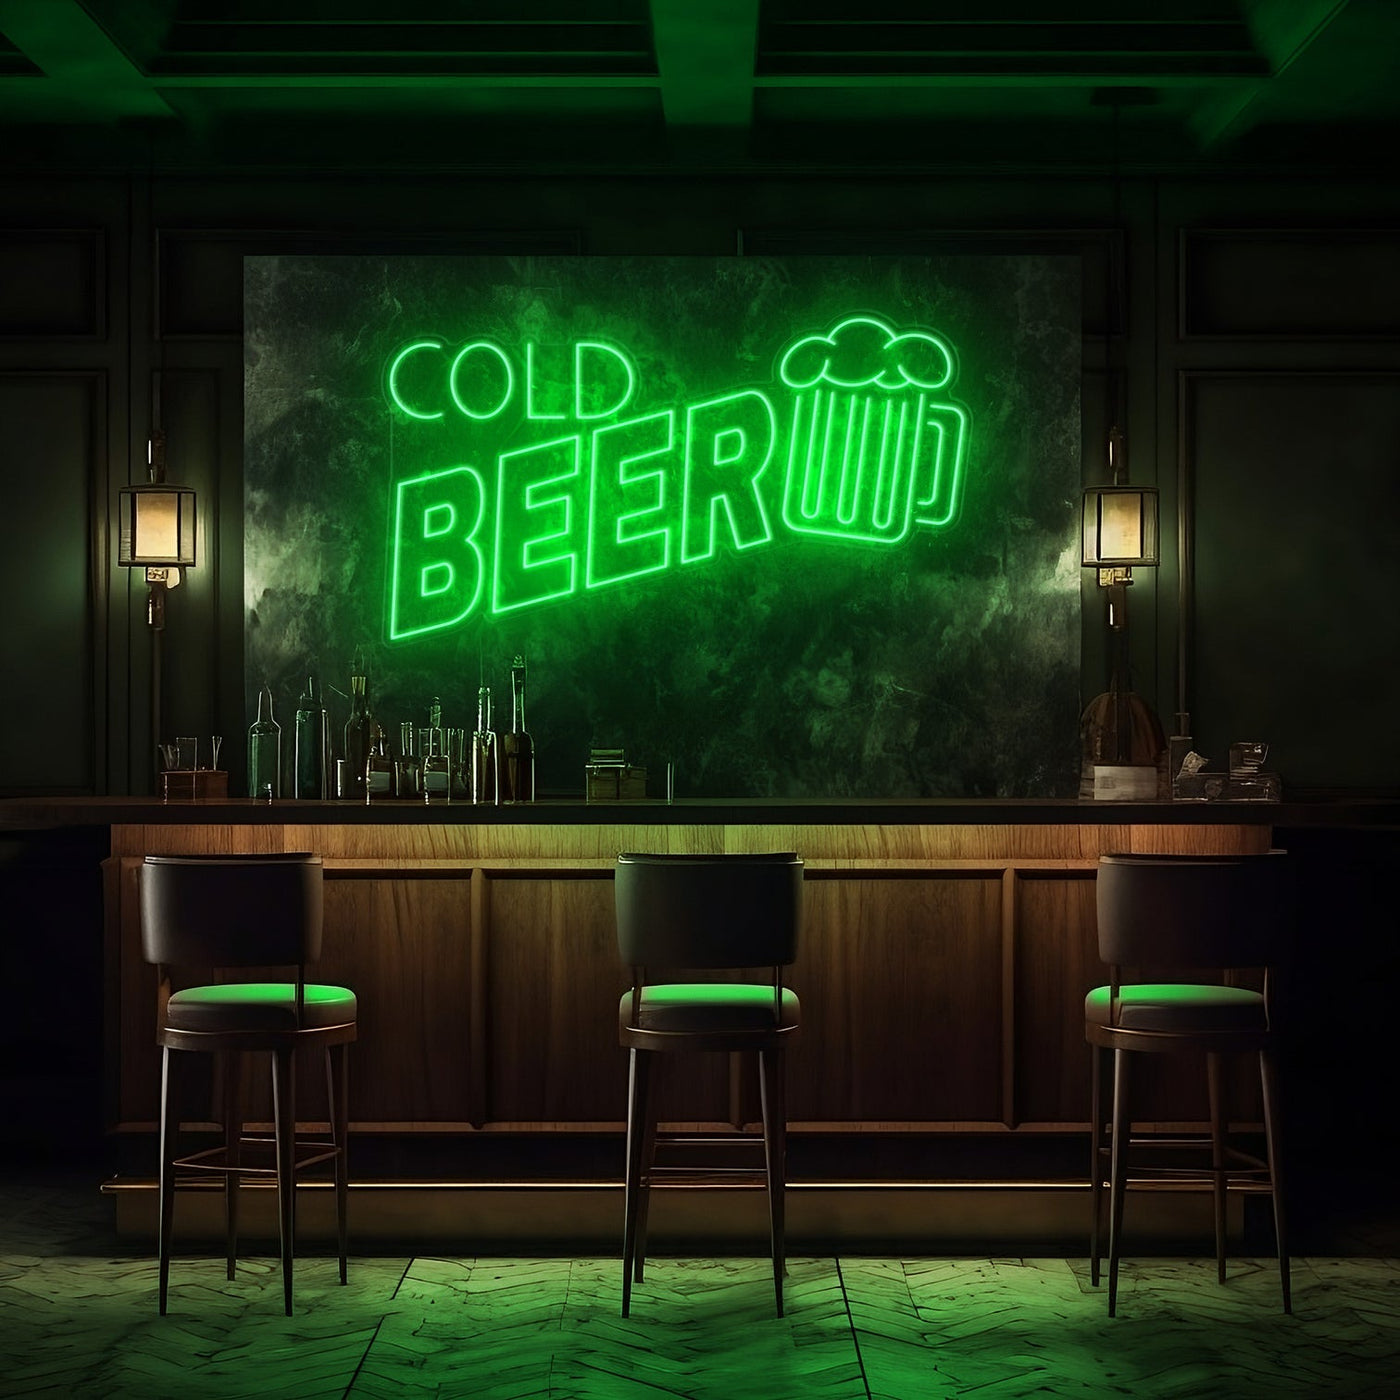 Cold Beer Bar LED Neon Sign - 30 InchGreen